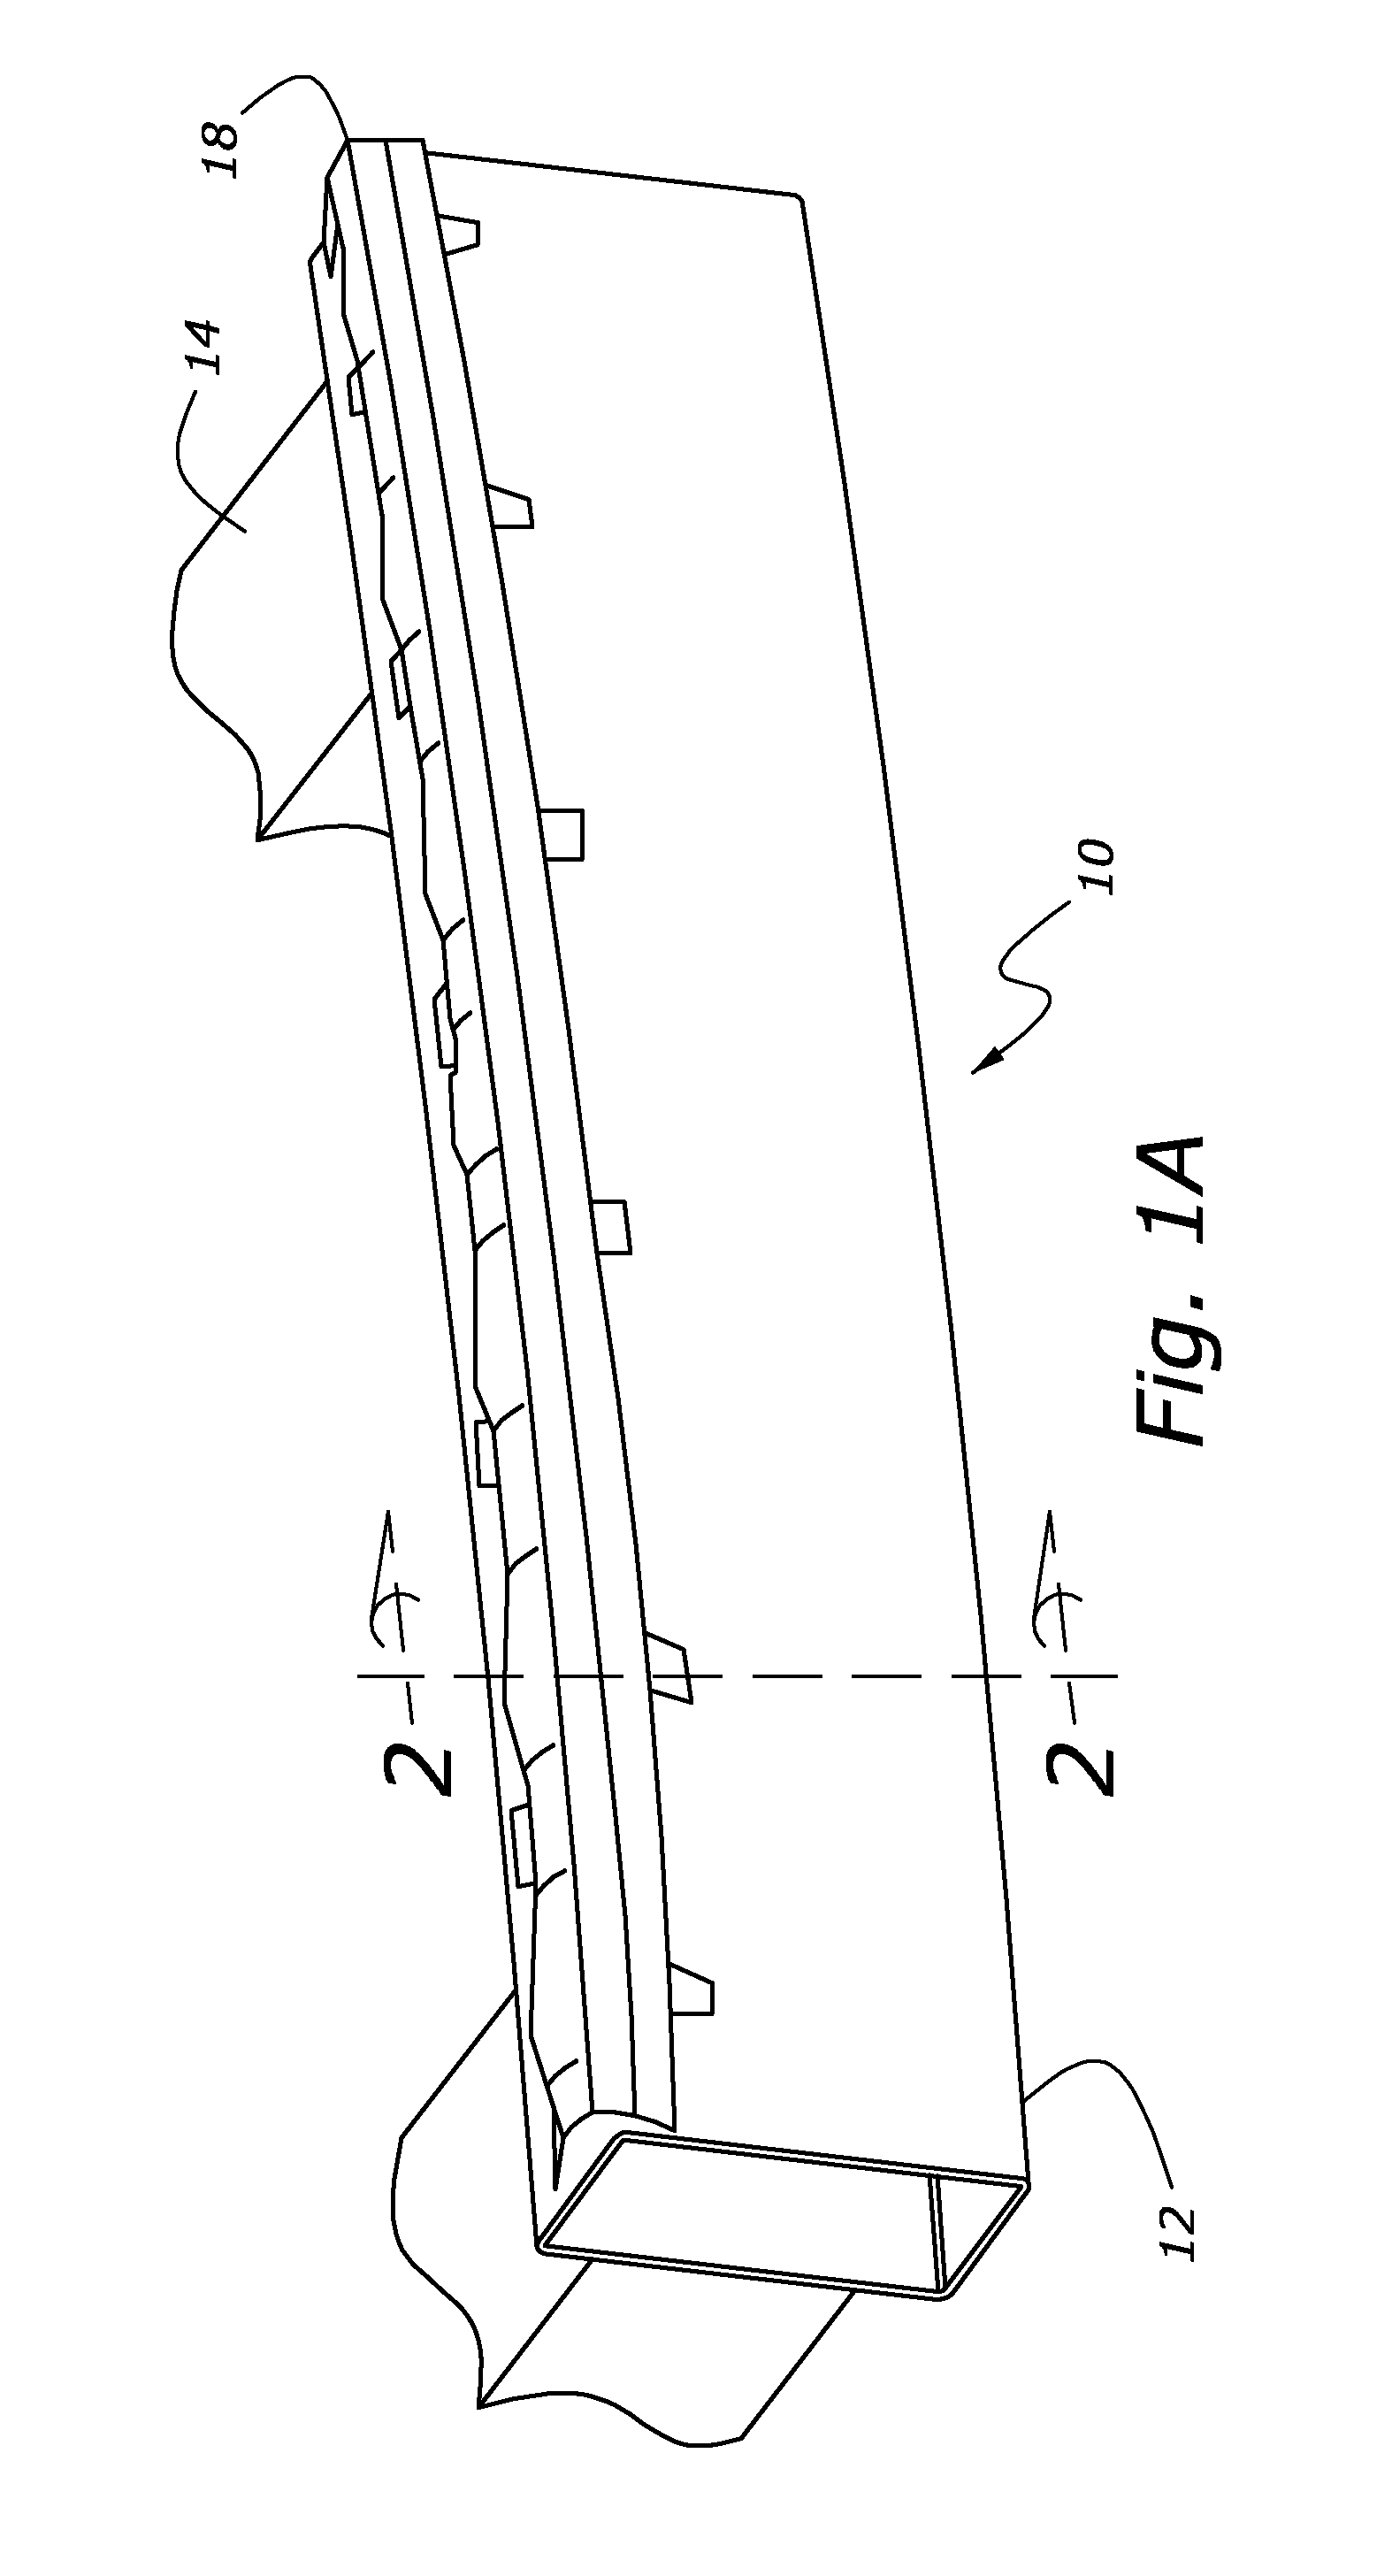 Hybrid energy absorber for automobile bumper